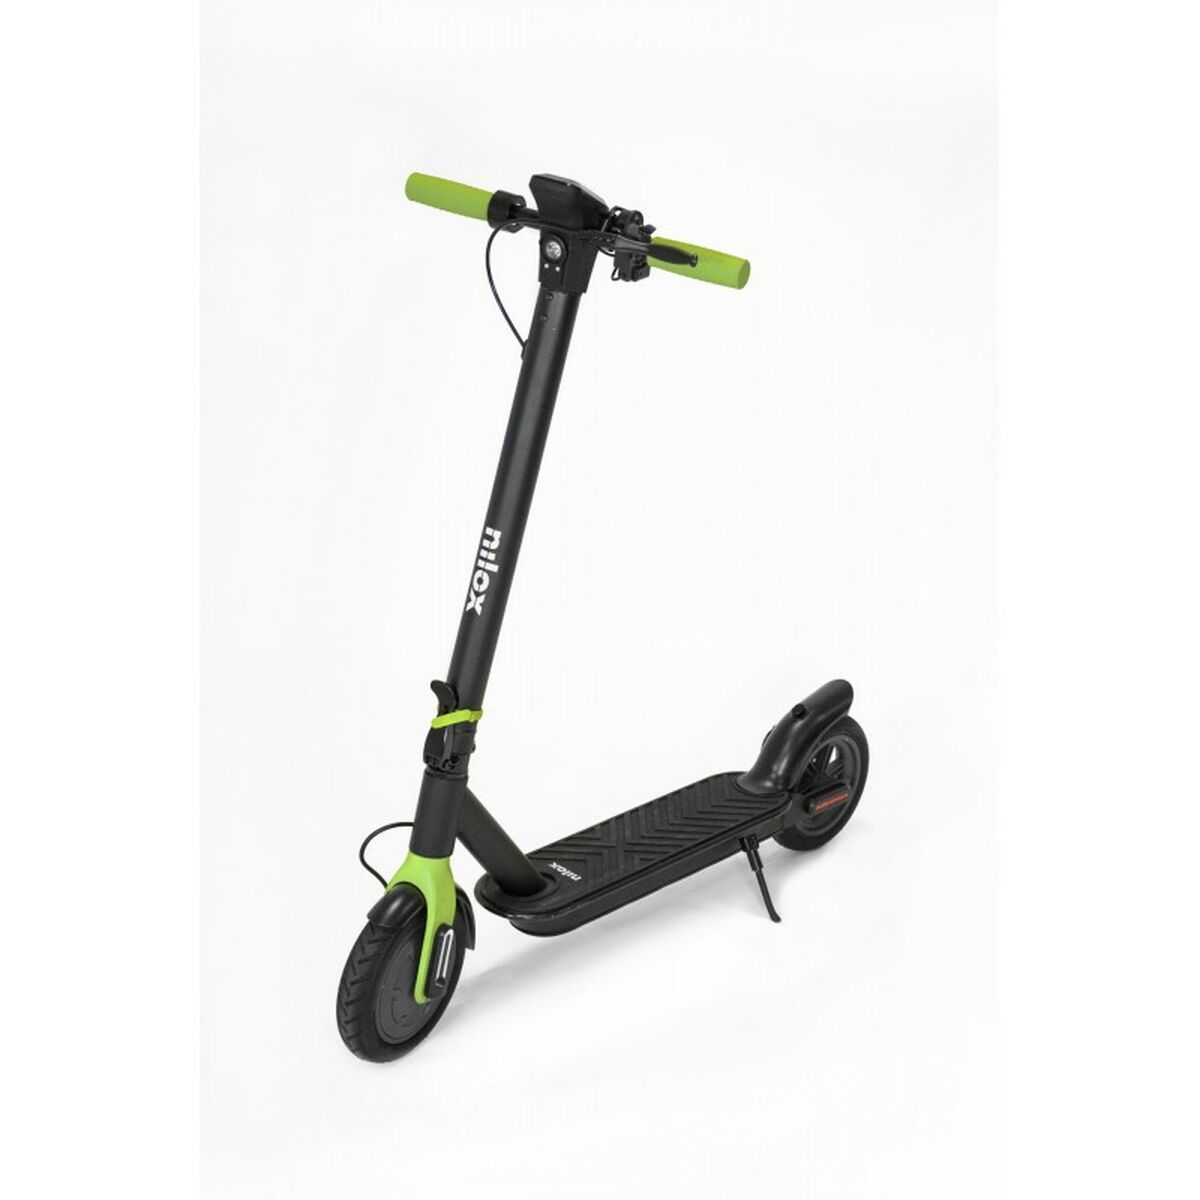 Electric Scooter Nilox M1, Nilox, Sports and outdoors, Urban mobility, electric-scooter-nilox-m1, Brand_Nilox, category-reference-2609, category-reference-2629, category-reference-2904, category-reference-t-19681, category-reference-t-19756, category-reference-t-19876, category-reference-t-21245, category-reference-t-25387, Condition_NEW, deportista / en forma, Price_300 - 400, RiotNook